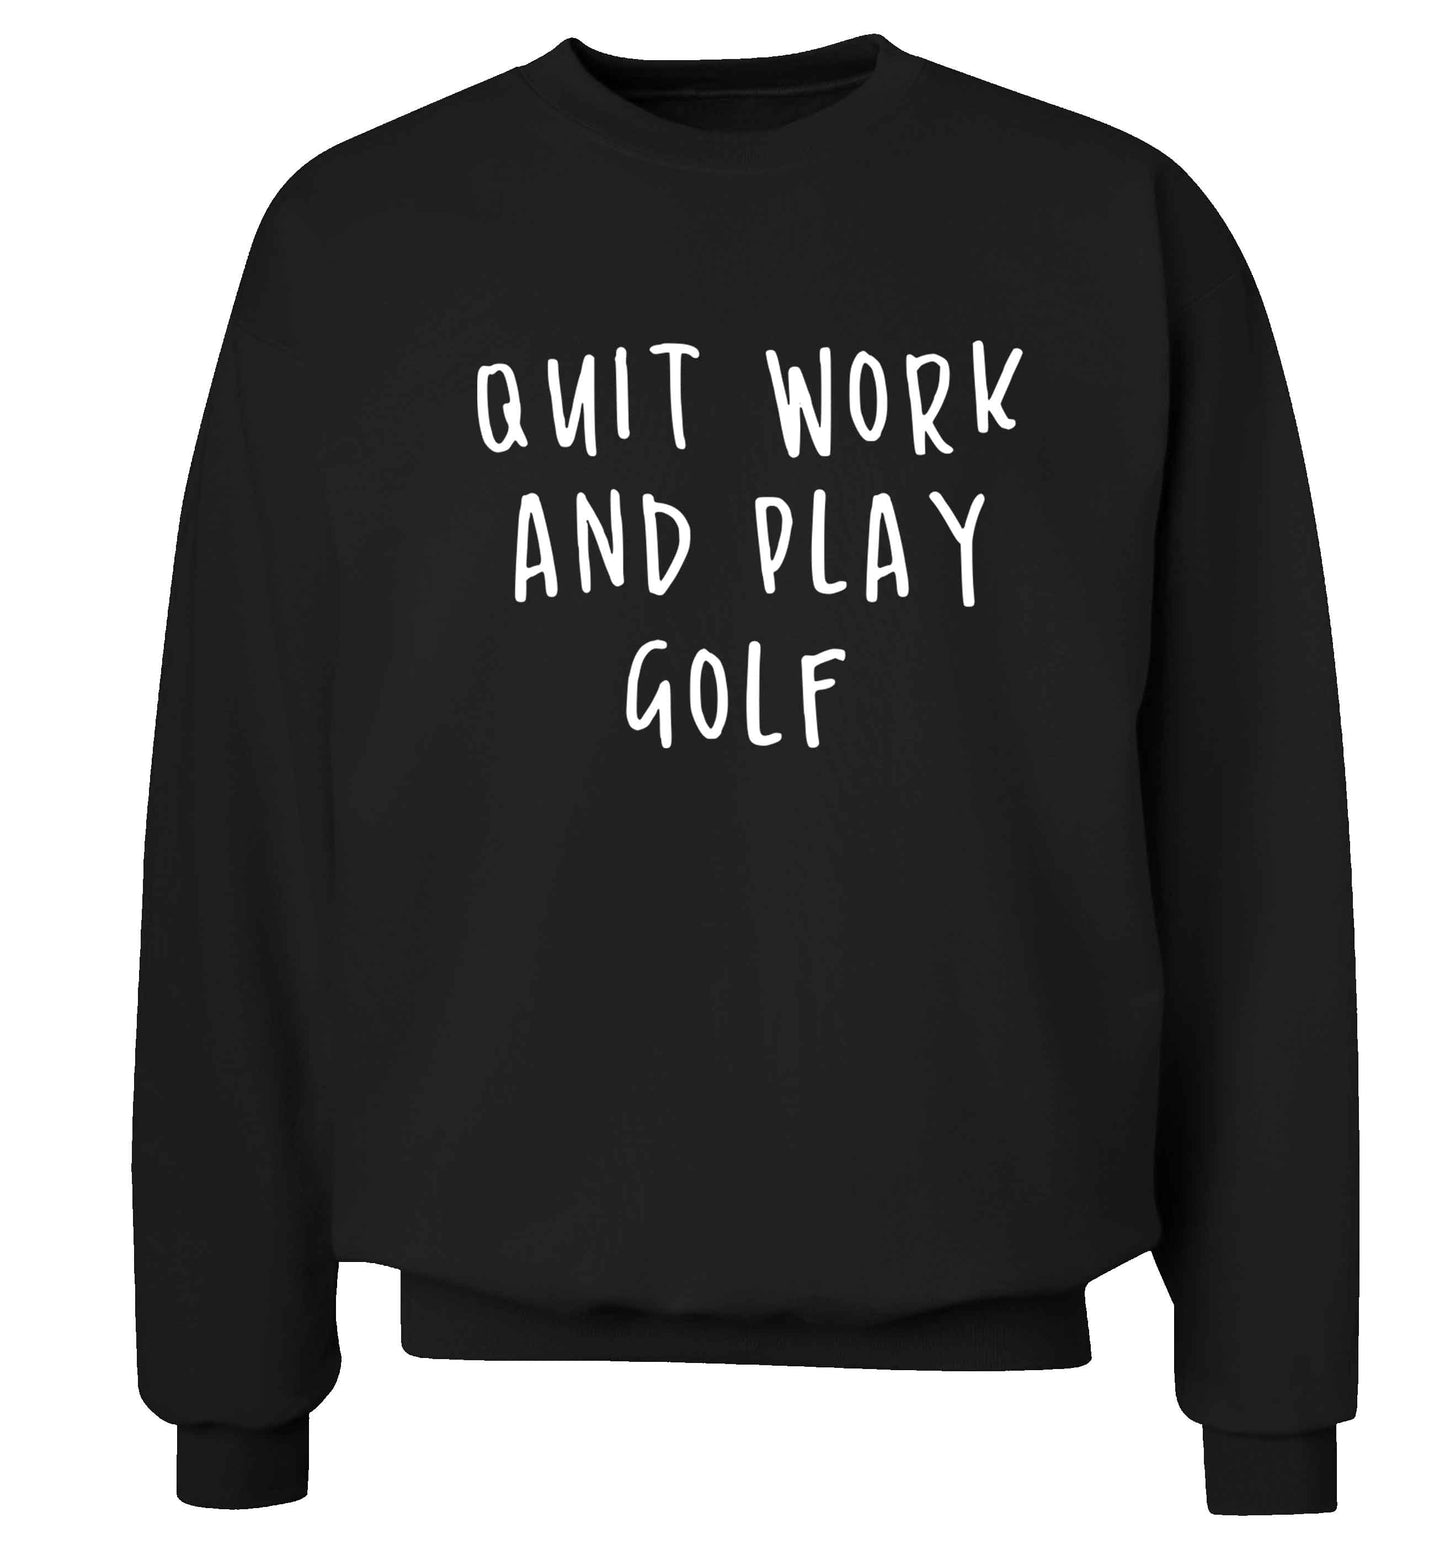 Quit work and play golf Adult's unisex black Sweater 2XL